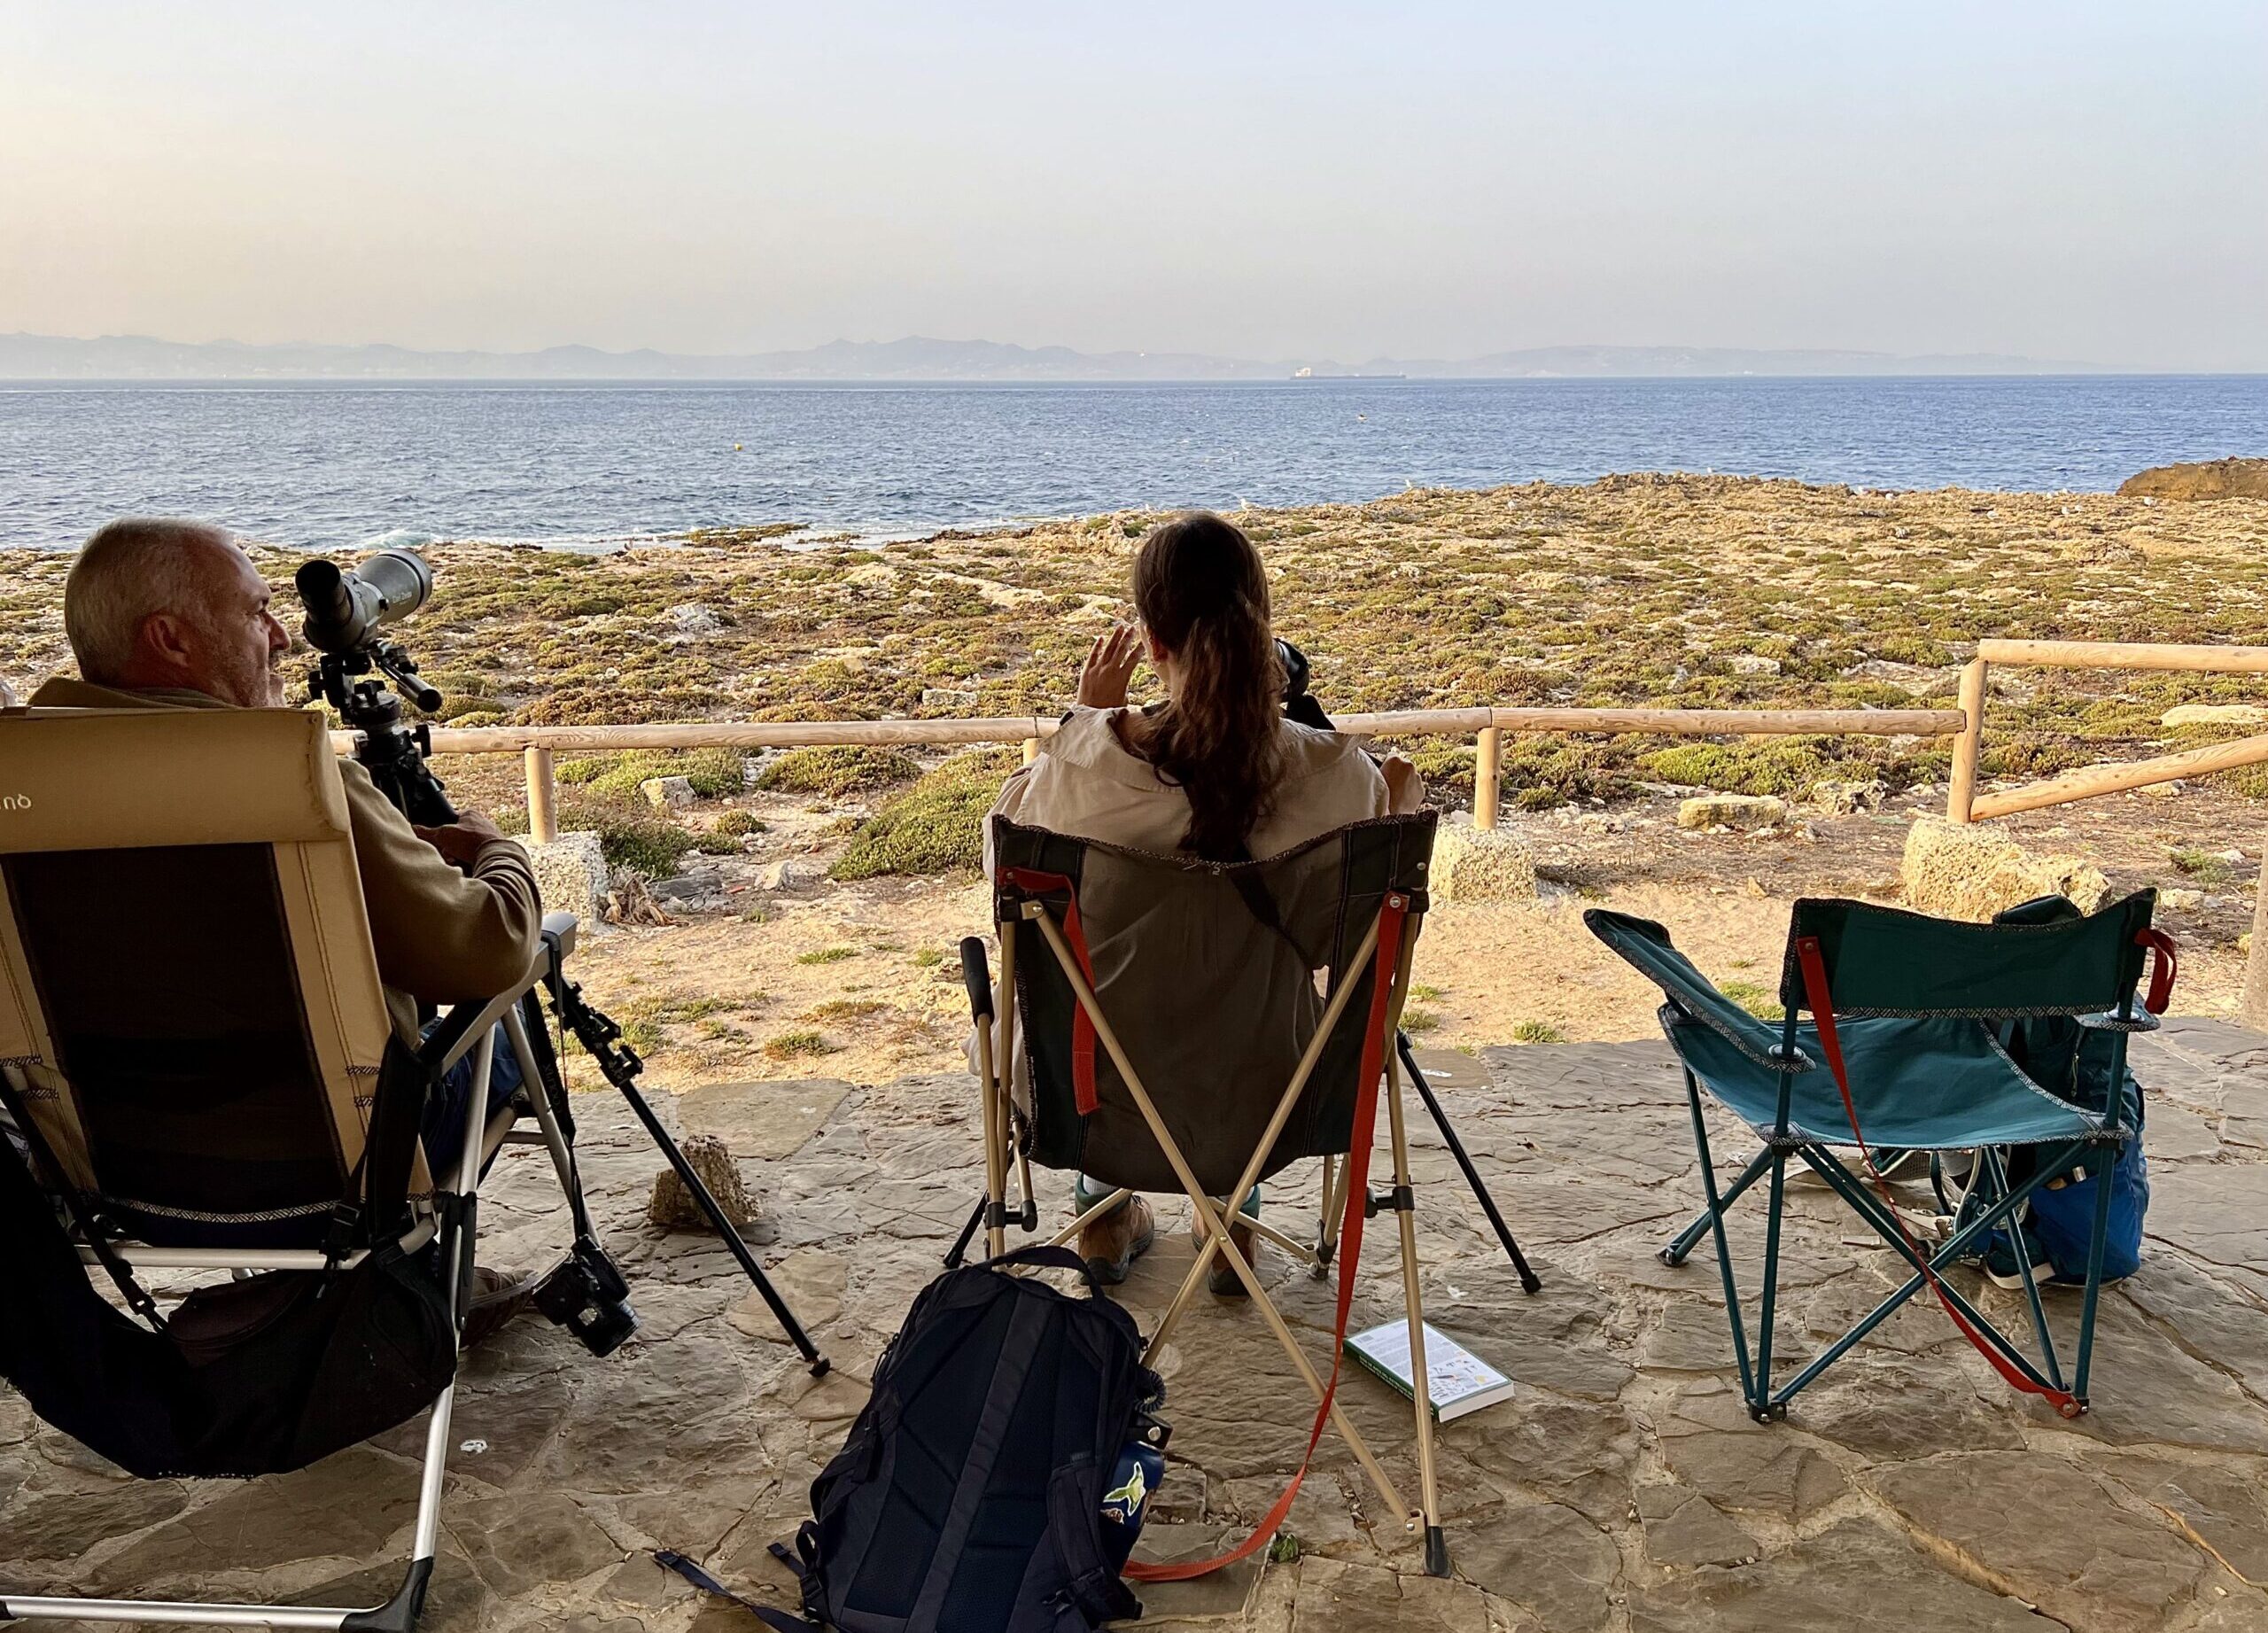 Two people seen from the back sit in foldable camping chairs. They are looking out across a rocky beach and water, with distant mountains barely seen in the haze across the strait. They have spotting scopes set up on tripods looking out over the water.